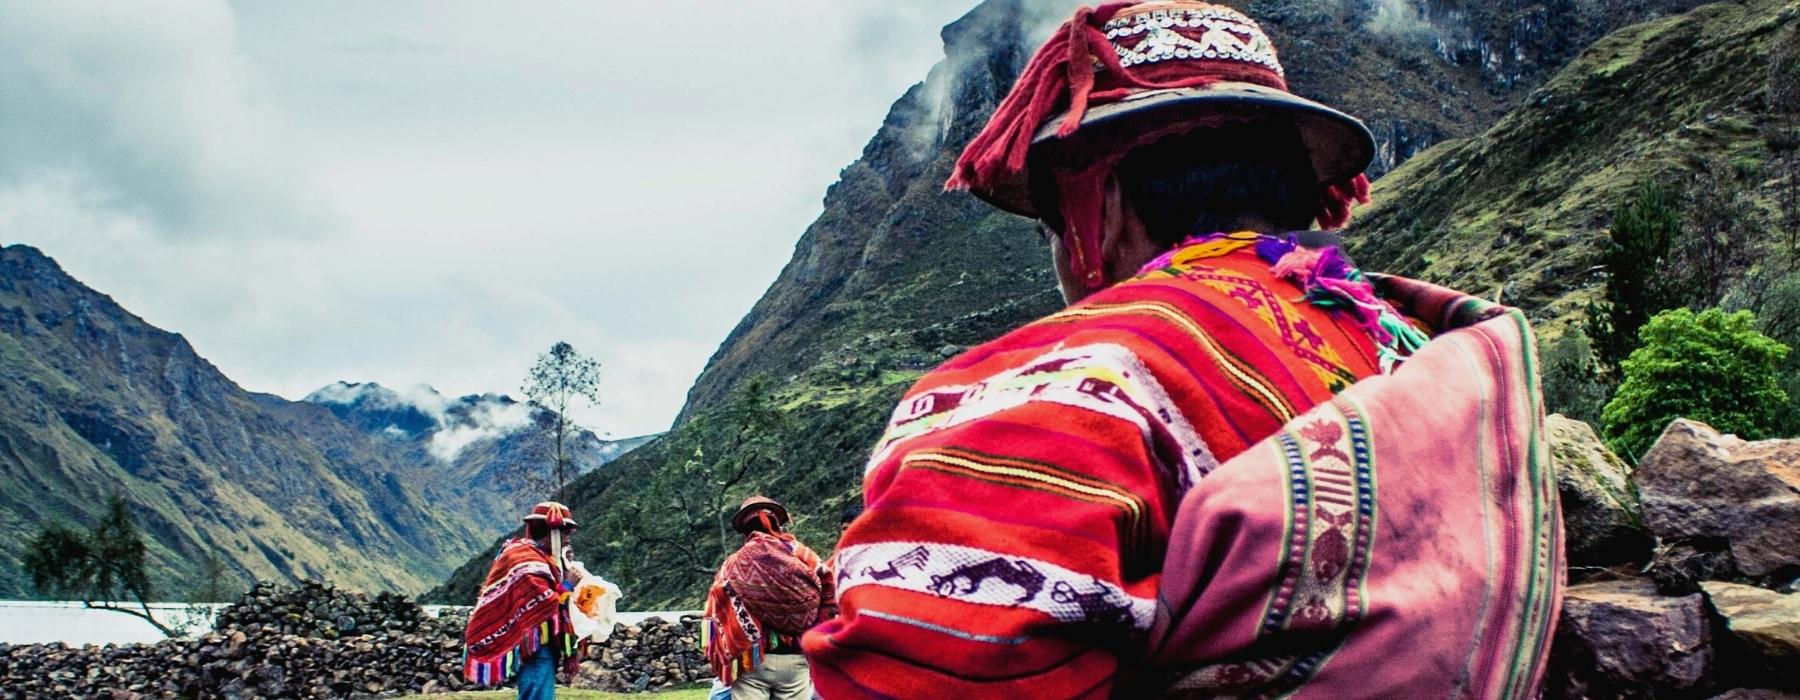 LARES TREK: EVERYTHING YOU NEED TO KNOW